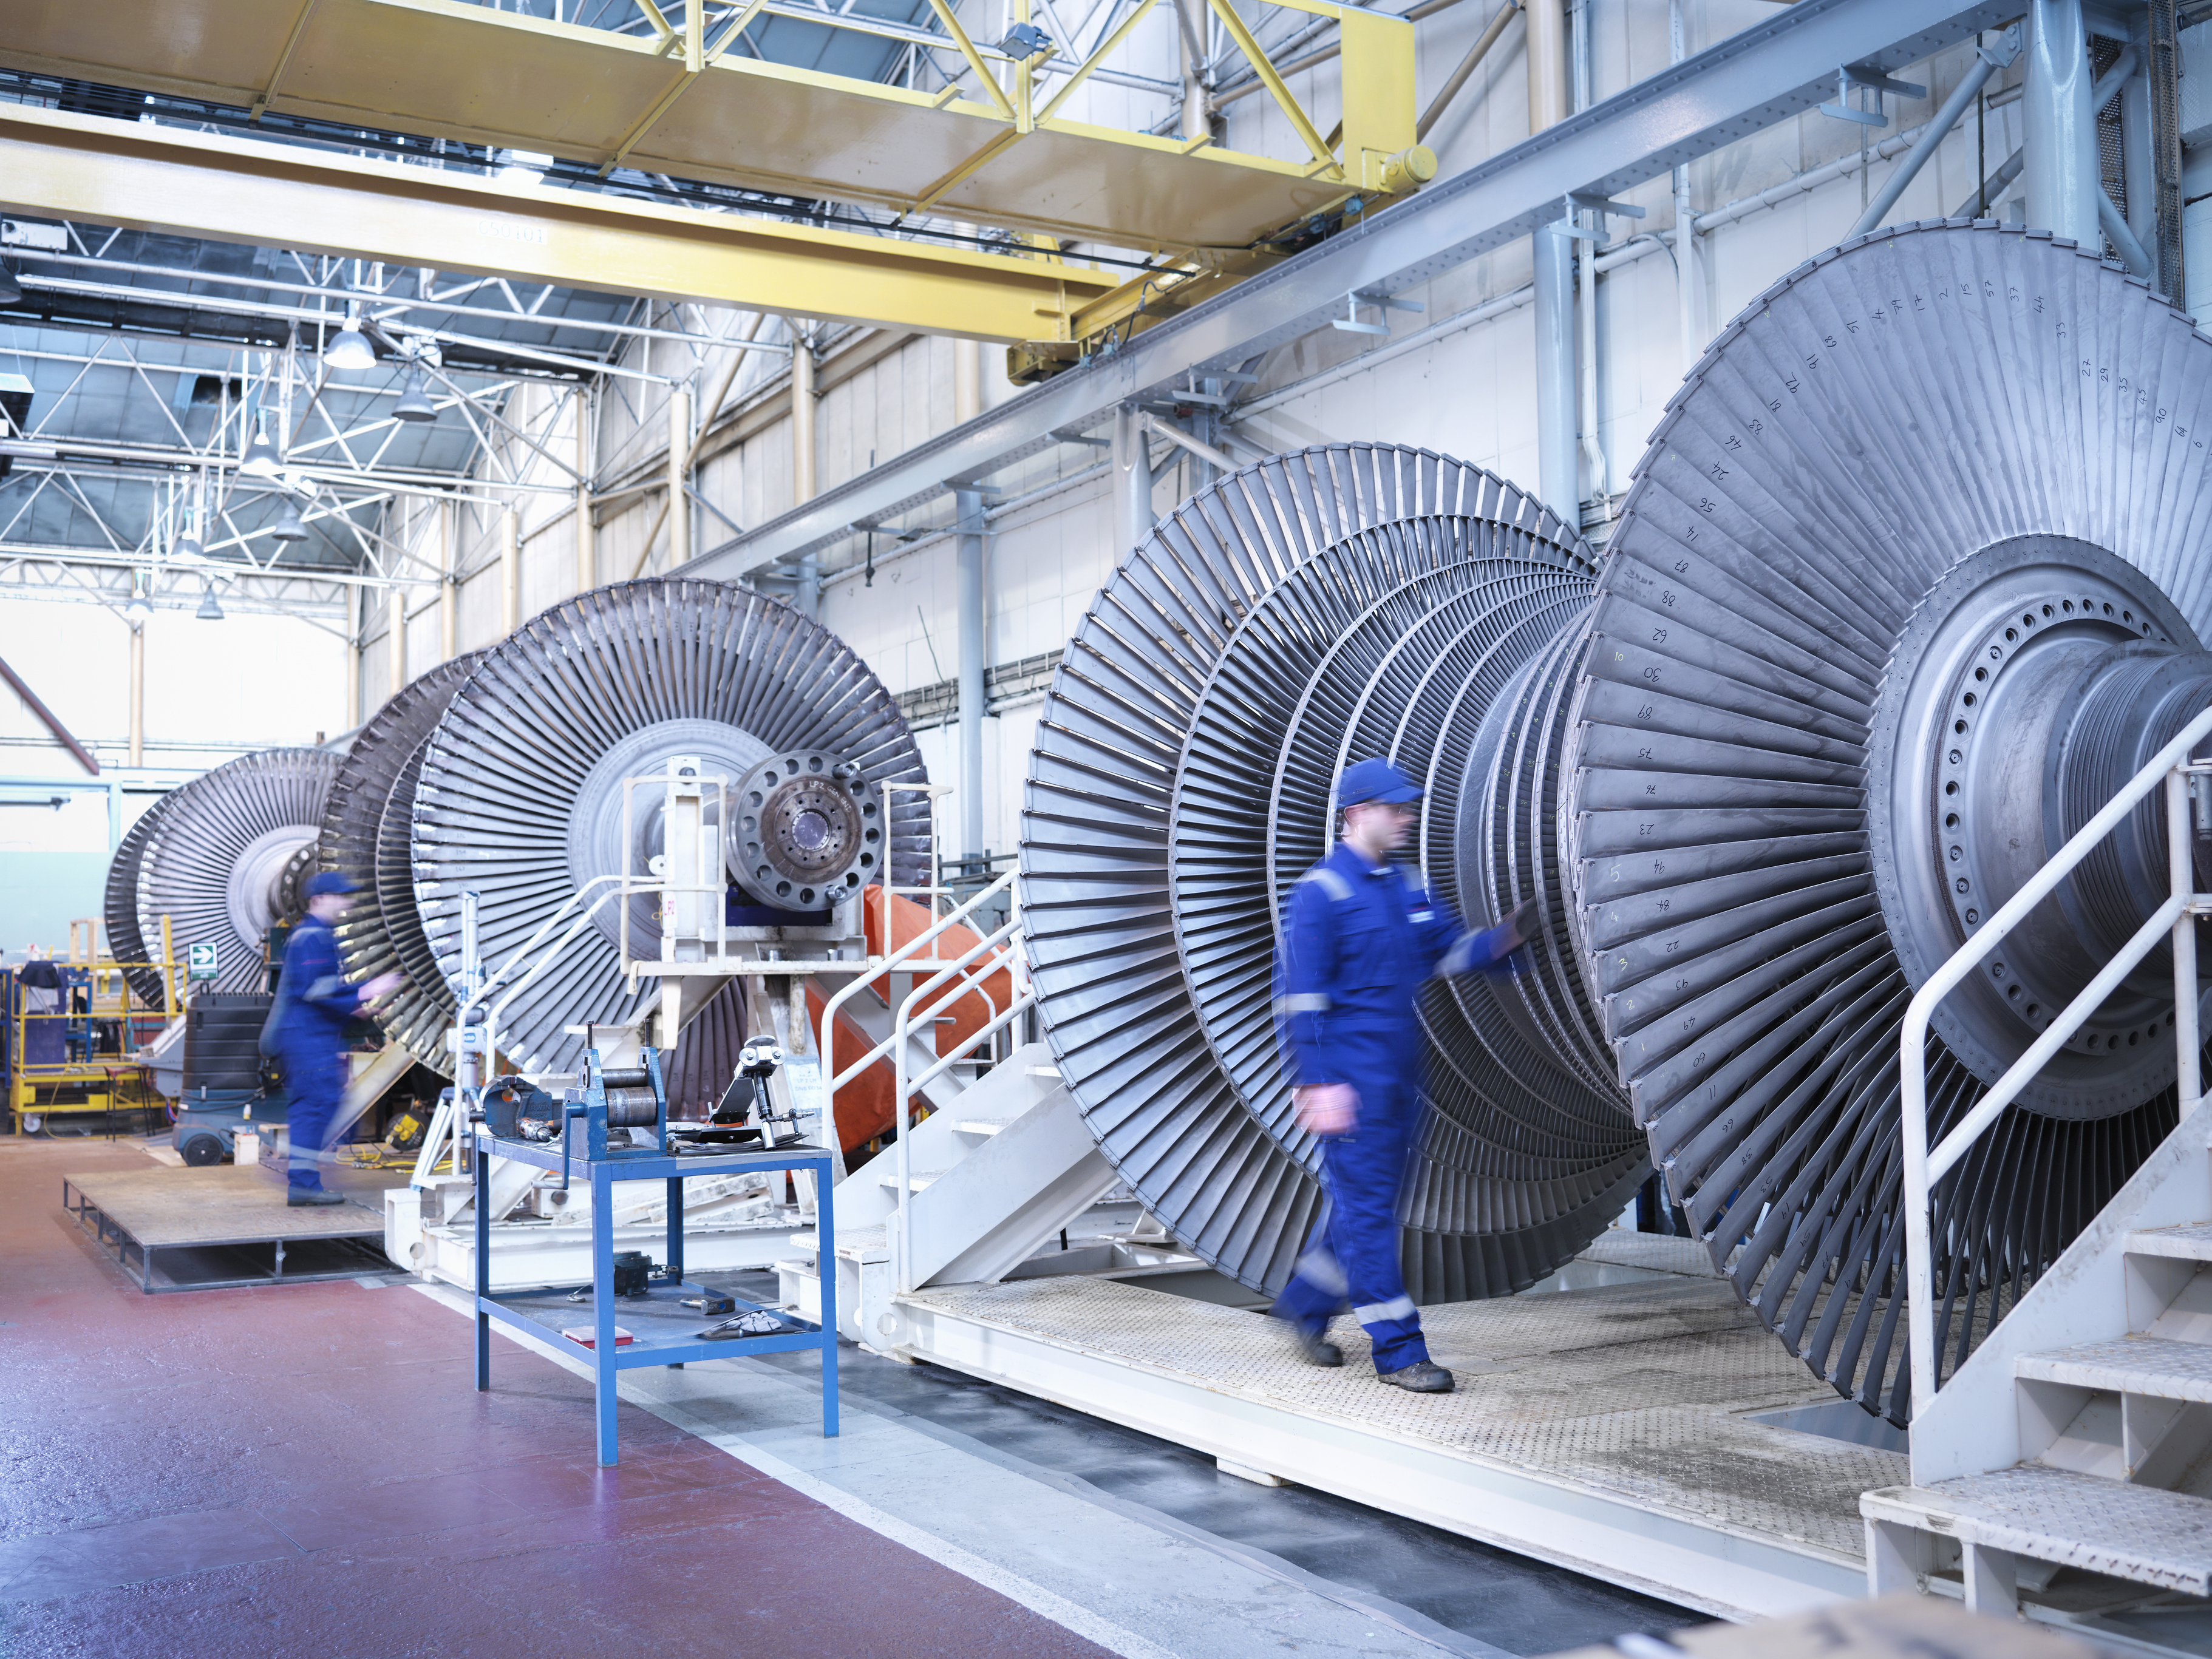 Manufacturers working on turbines